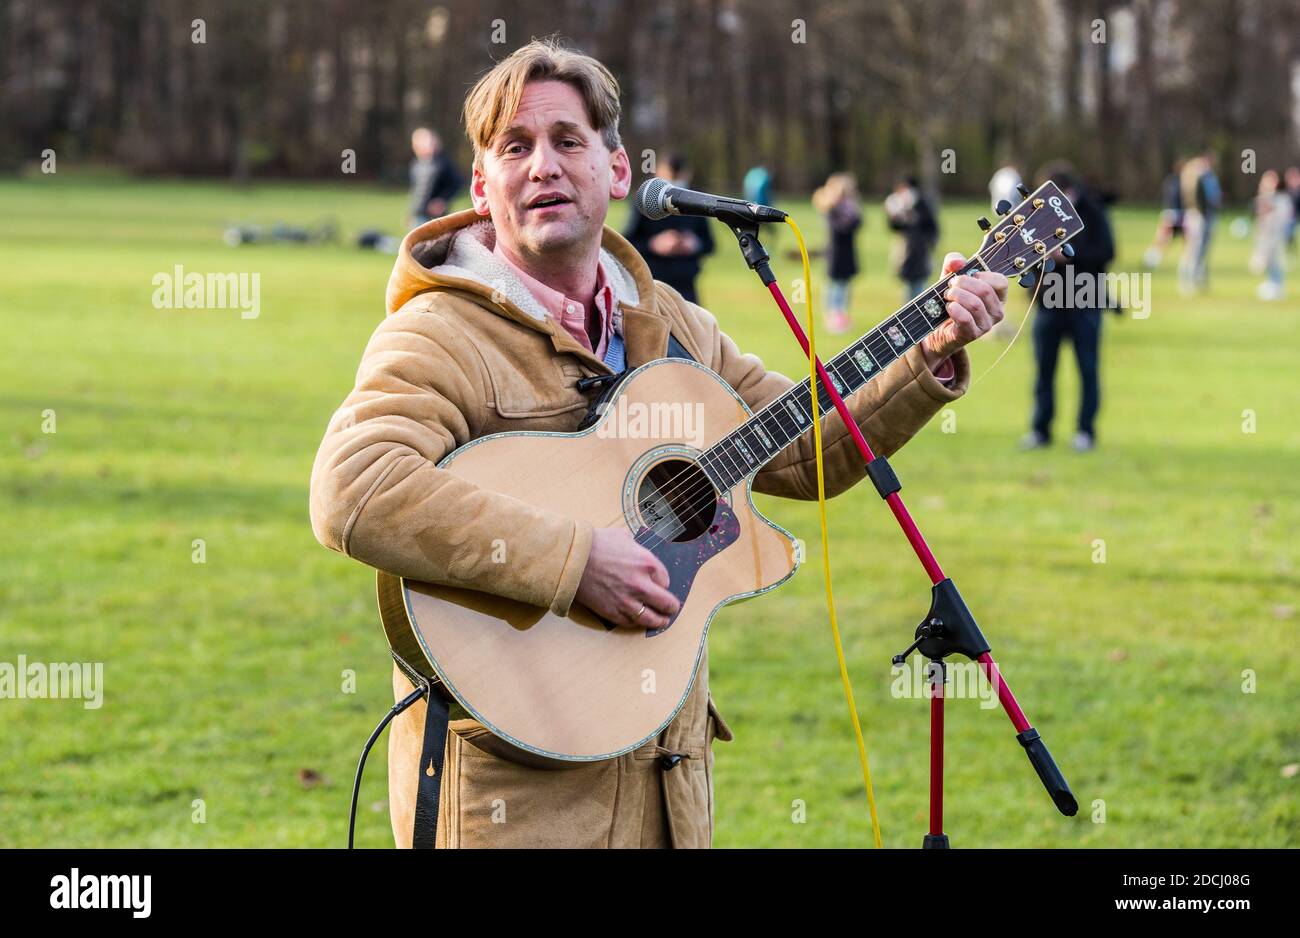 Munich, Bavaria, Germany. 21st Nov, 2020. Christian Stockmann of Christen im Widerstand sings at a corona rebel ''church service''. Bypassing a ban on ''Hygienedemos'' in Munich, the Coronarebels organized as a church service (Gottesdienst) that ultimately took place in the English Garden. The event was organized by multi-activist Frank Winkler who is associated with animal rights groups as well as Parents for Future, but more recently has been active since the beginning of the Corona conspiracy theory and anti-mask demonstrations, now moving up to the core of the organizational structure Stock Photo